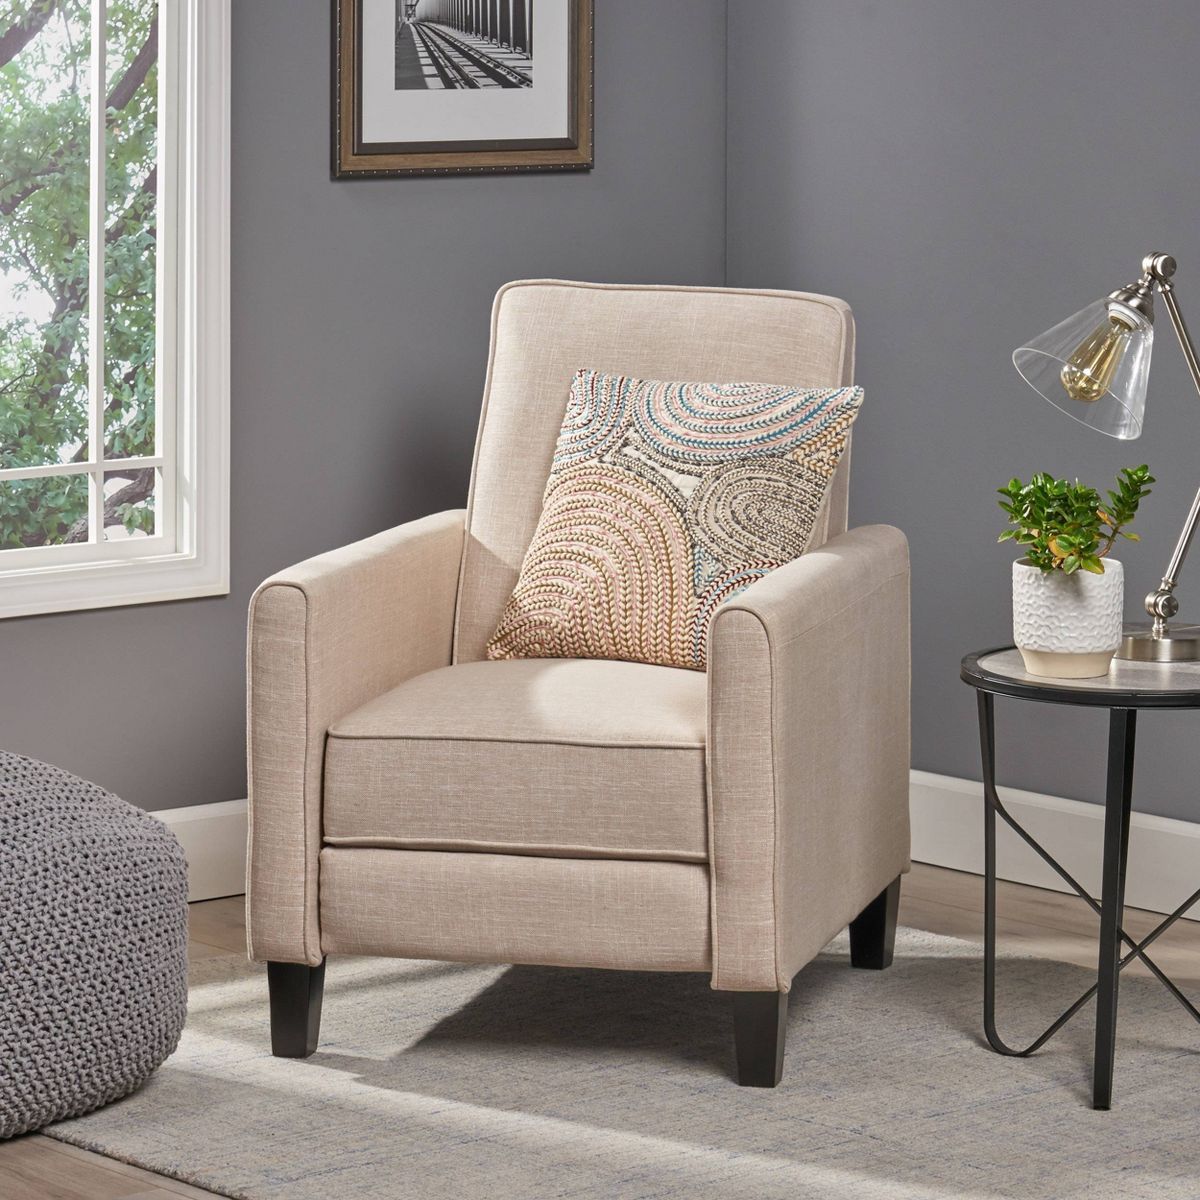 Darvis Fabric Recliner Club Chair - Christopher Knight Home | Target